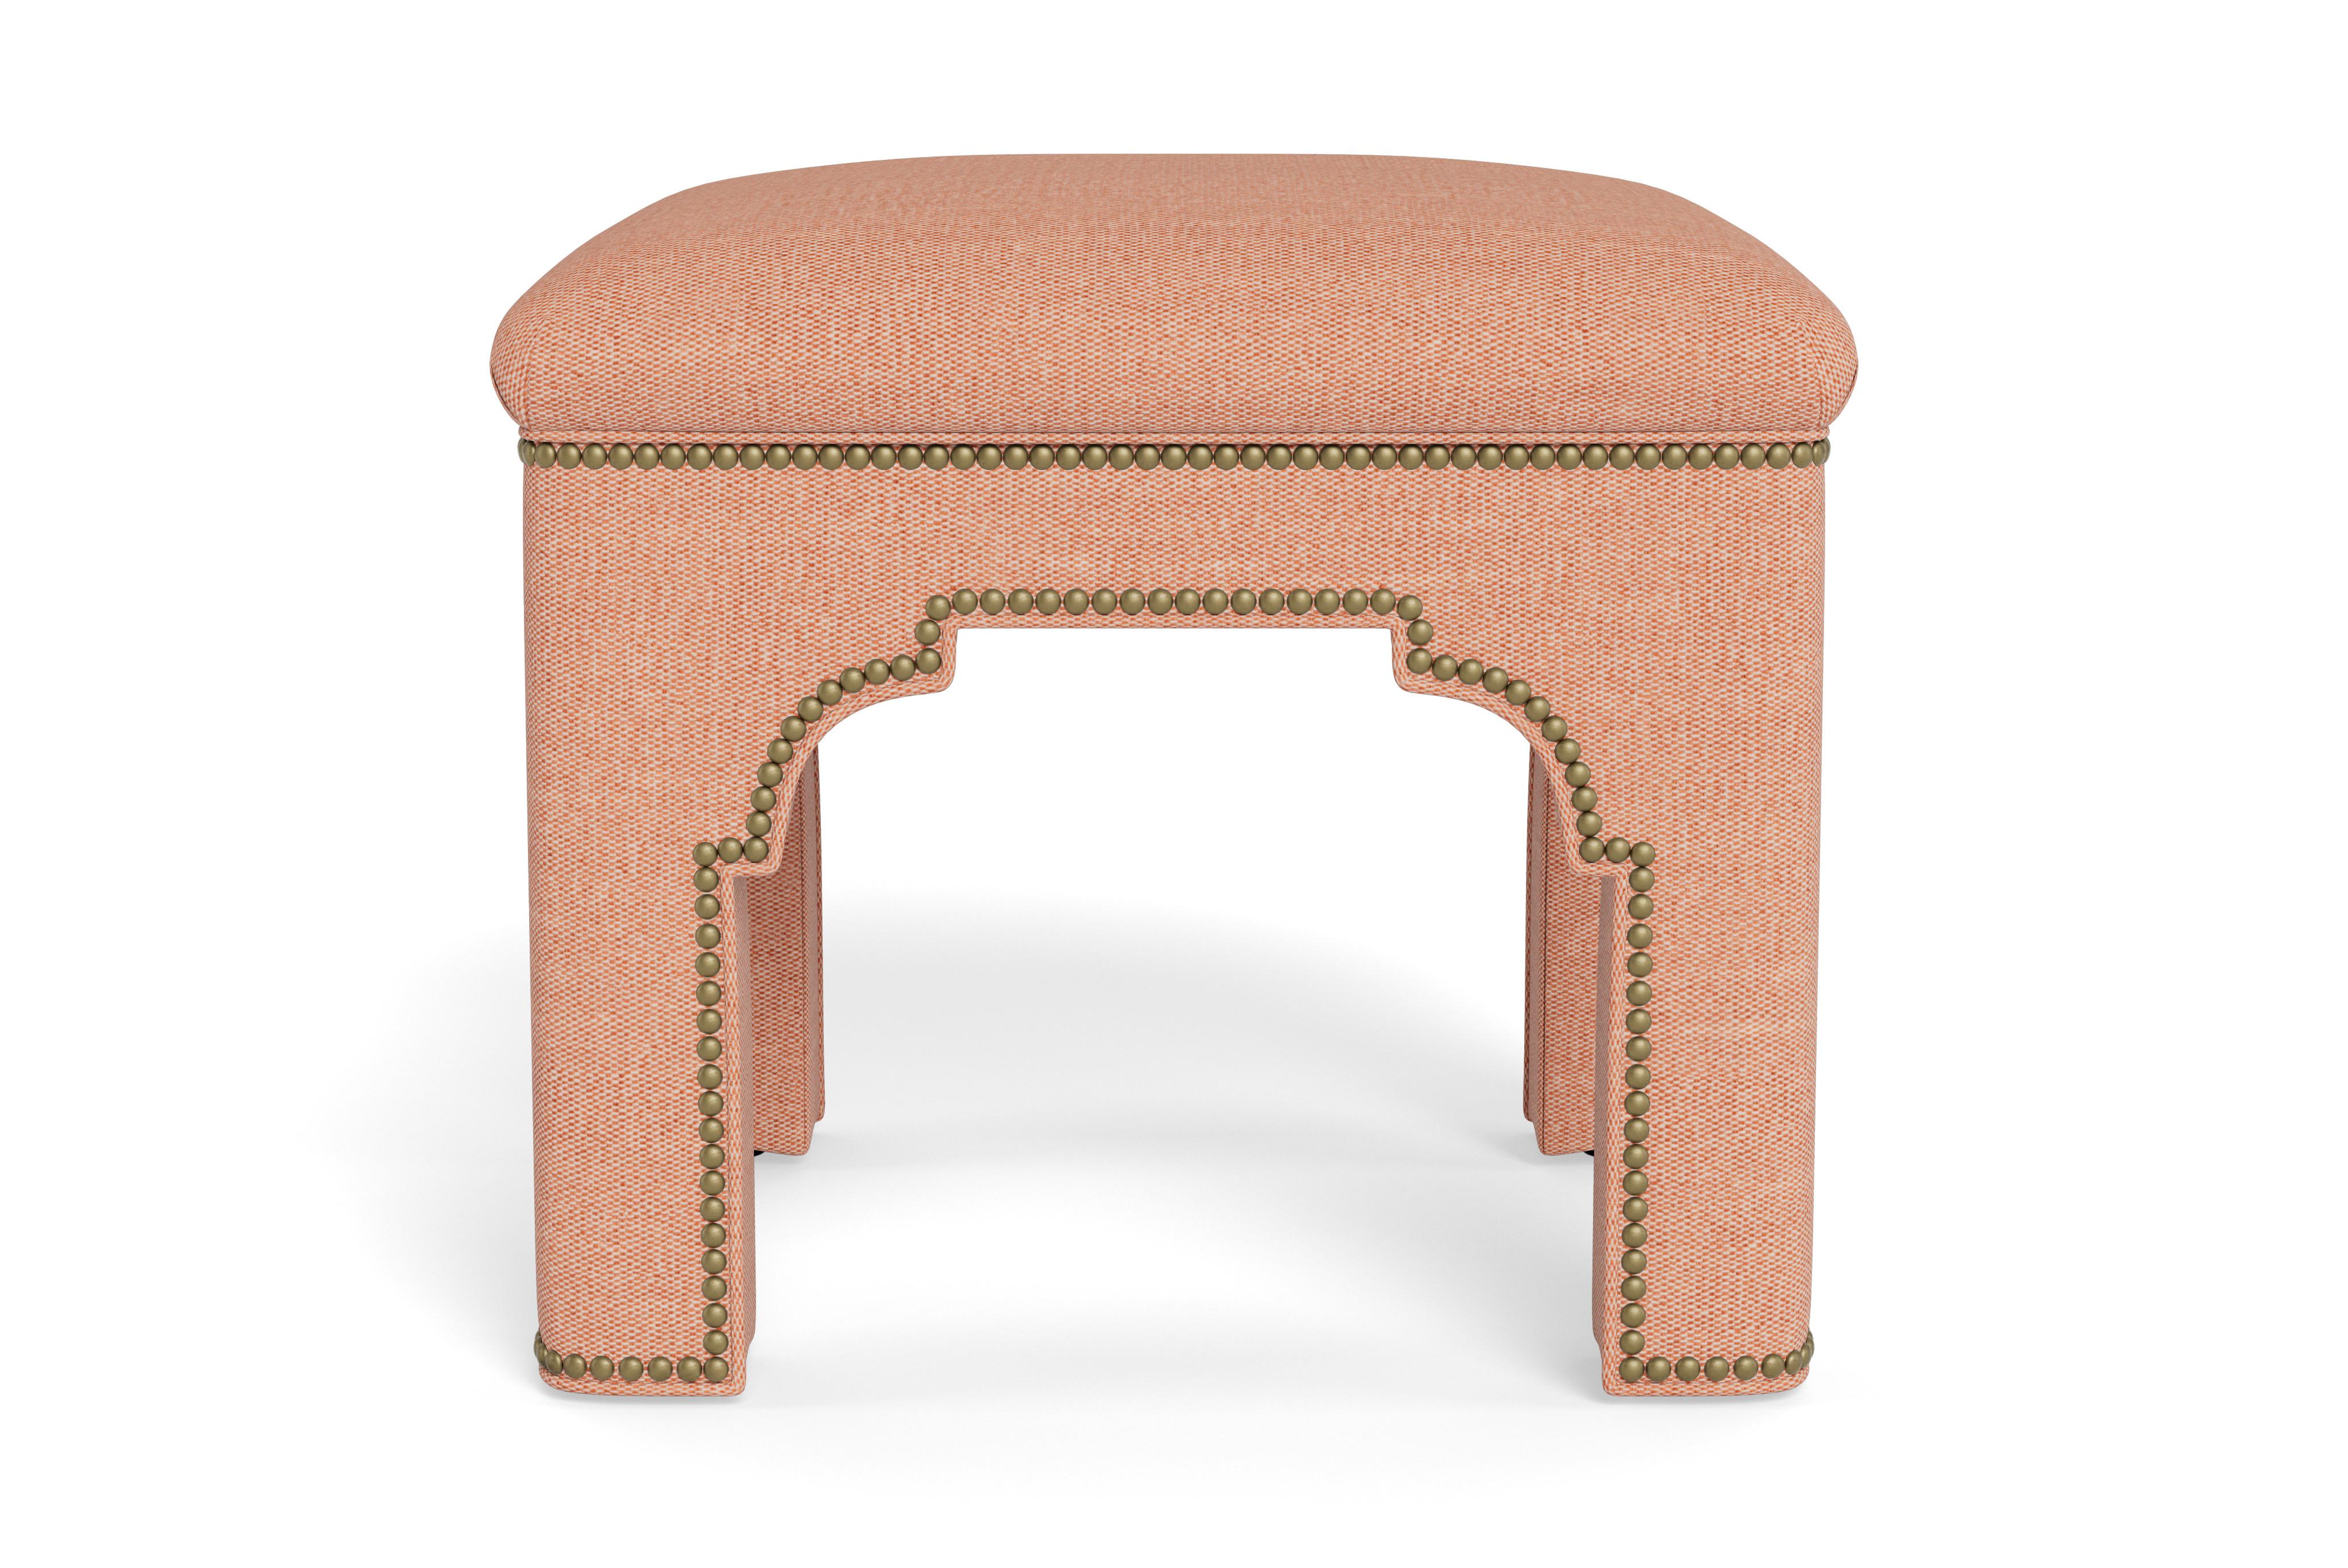 Add a chic accent to any room with this compact stool on its own or displayed in pairs.  Made to order with antique brass nail heads accenting adobe performance linen, a fabric that can be cleaned and withstand high traffic areas. The tightly